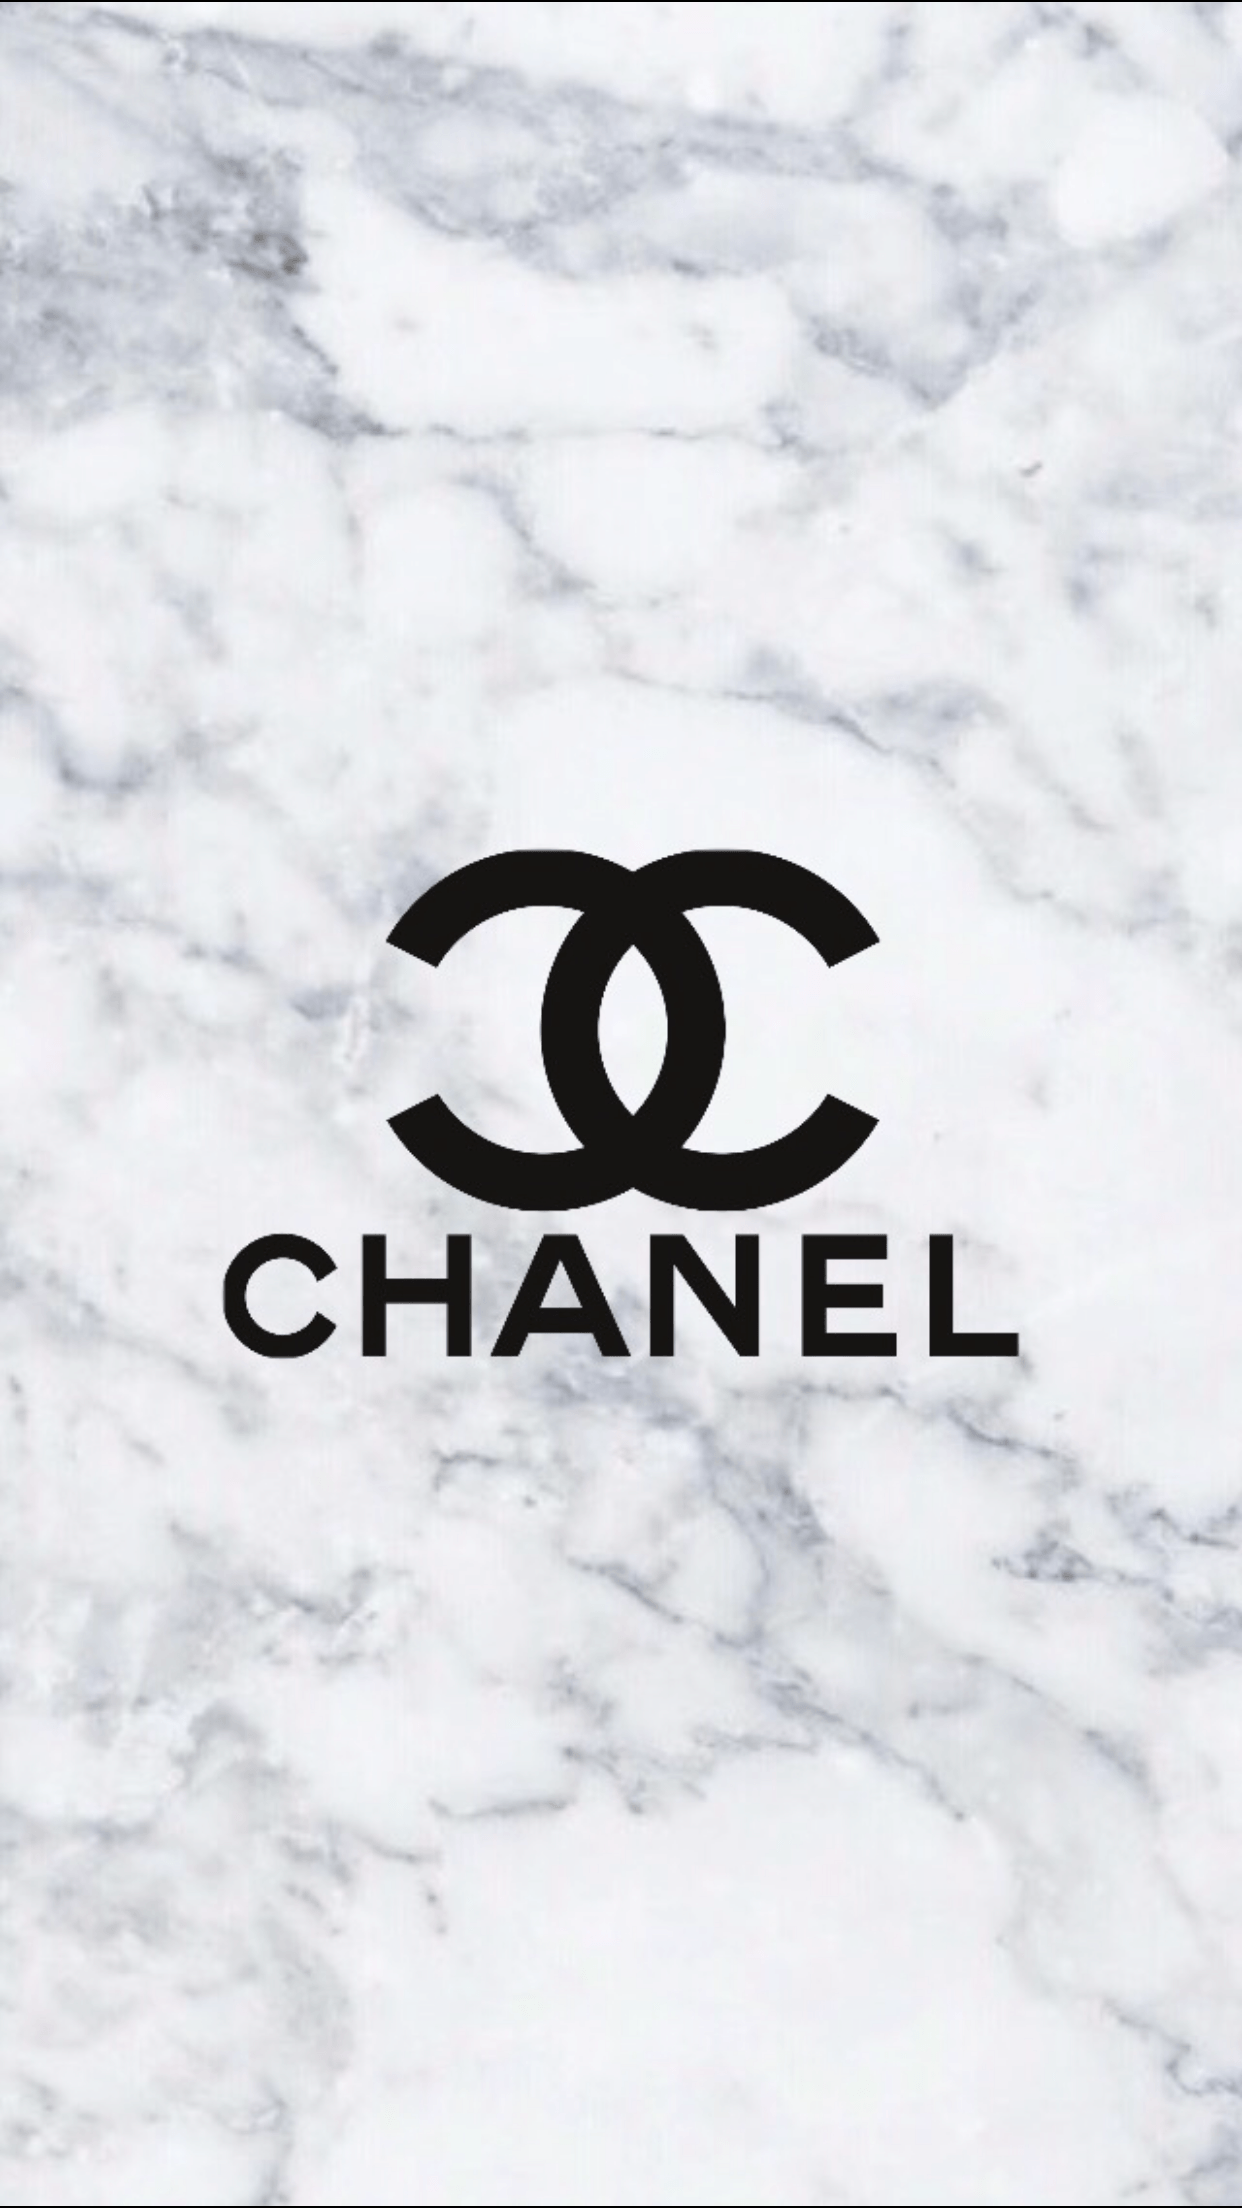 Deshaye ⛈ On Wallpapers - Chanel Logo With Marble Background - HD Wallpaper 